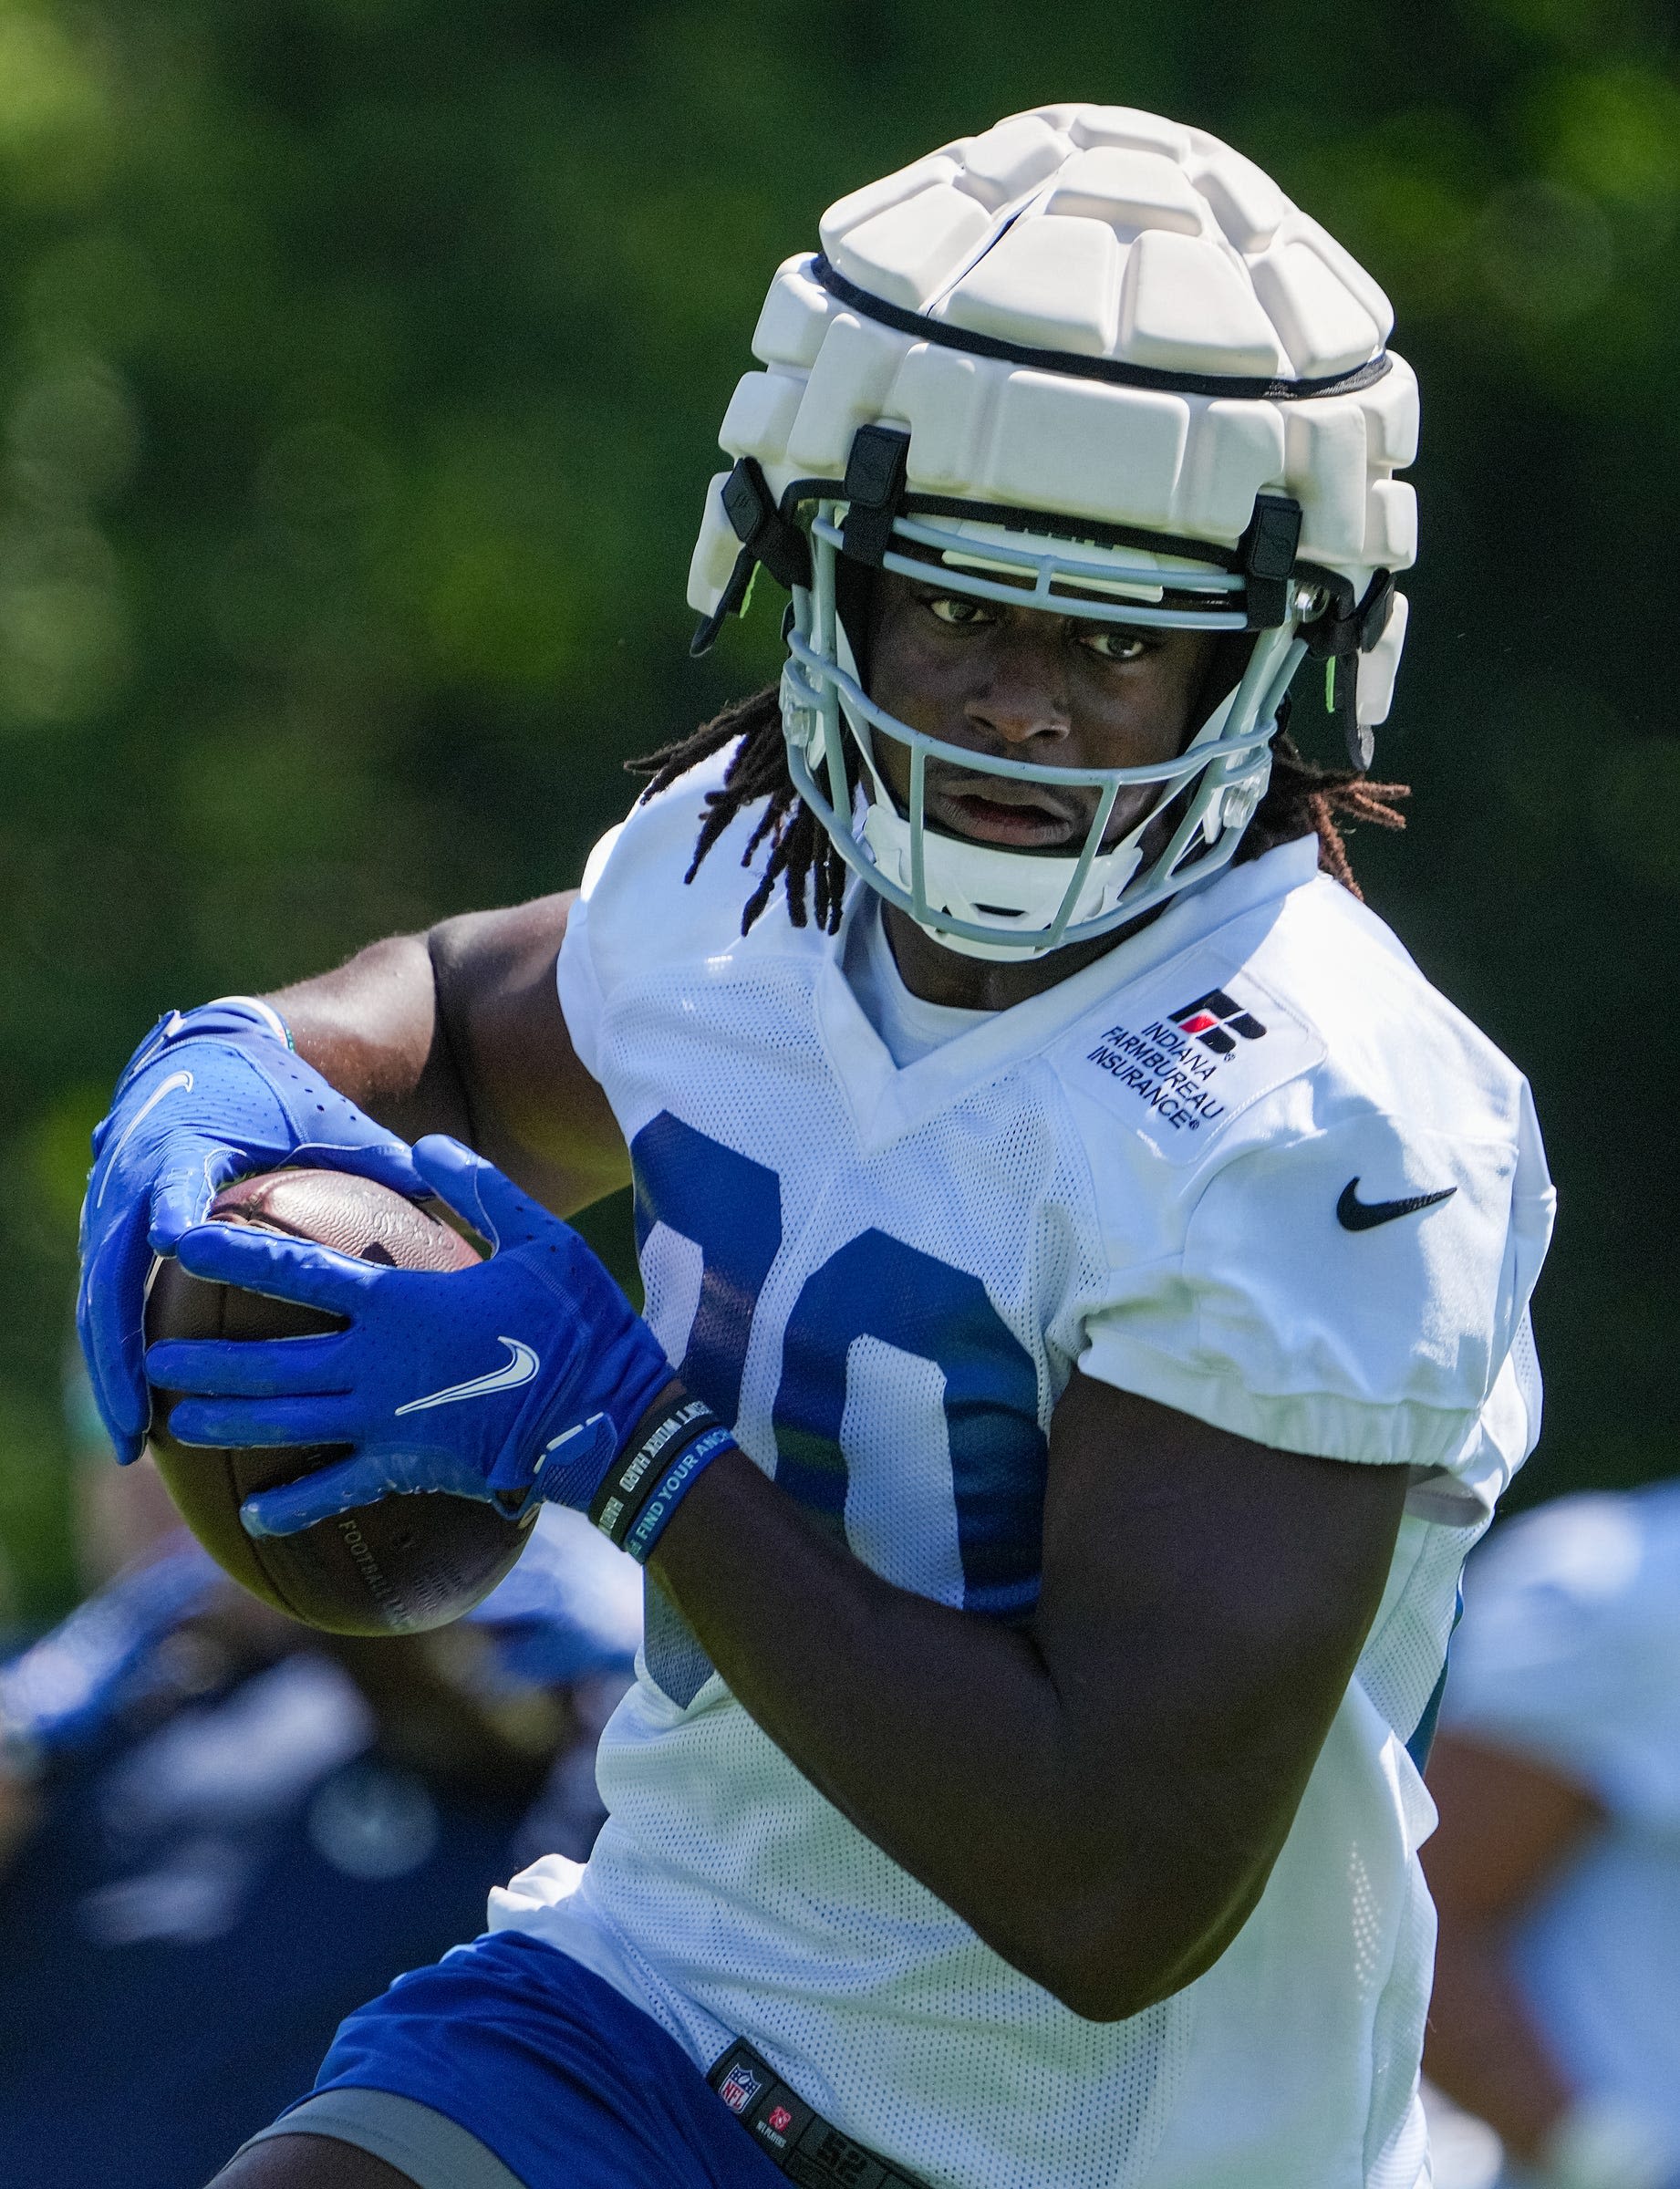 Colts 'excited' to get extended look at TE Jelani Woods and see what roles he can fill